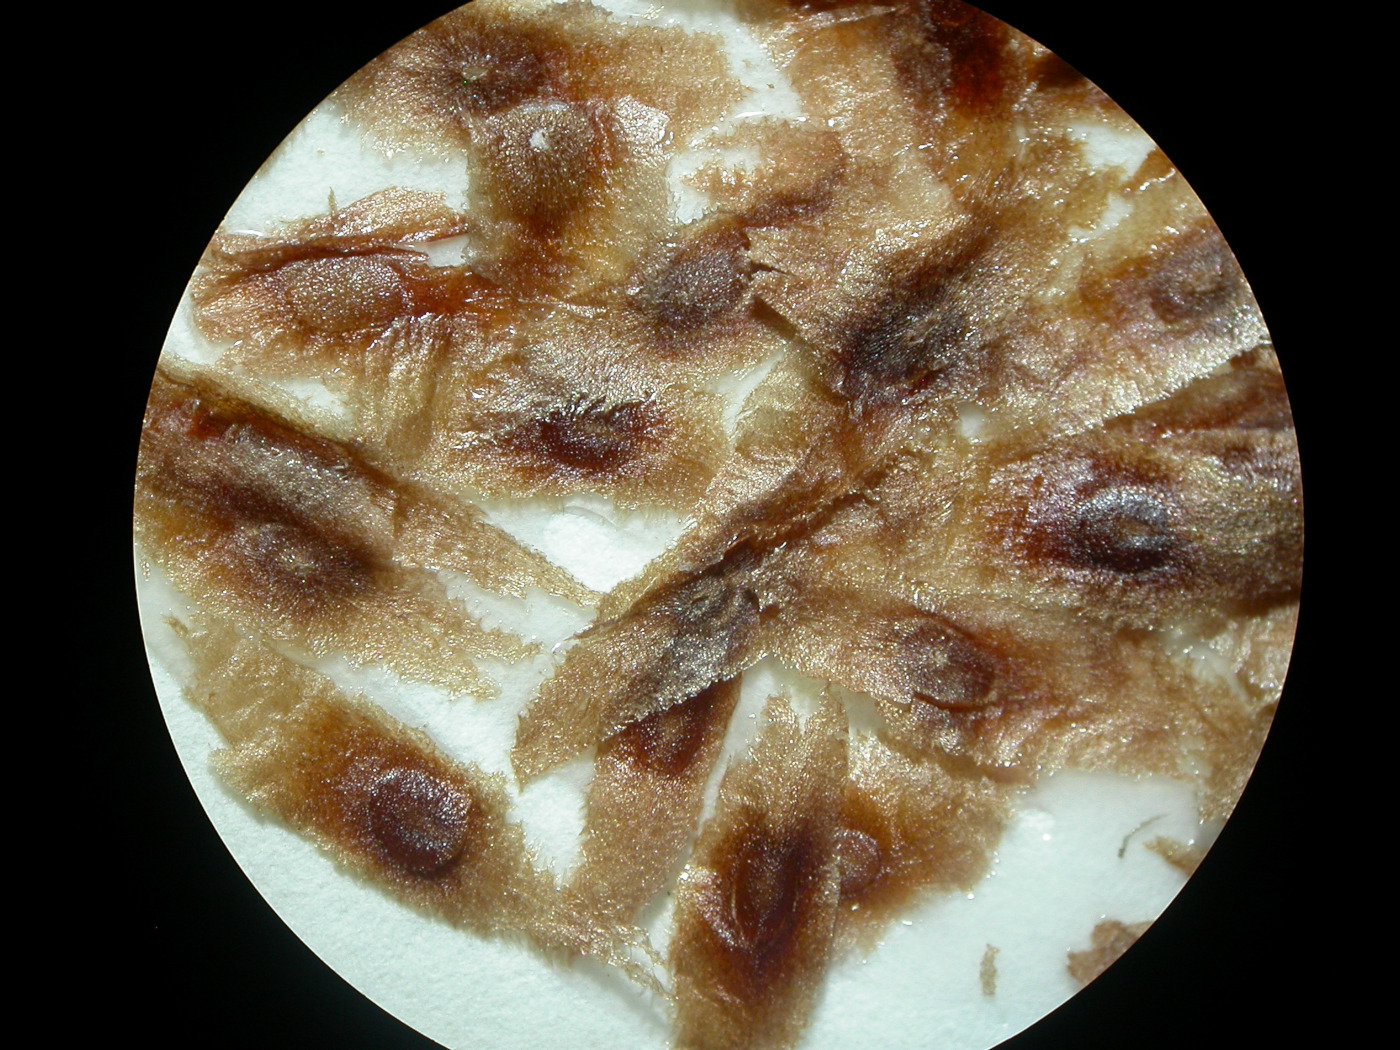 Seeds of Cinchona pubescens. Photo: CDF Archive, 2012.